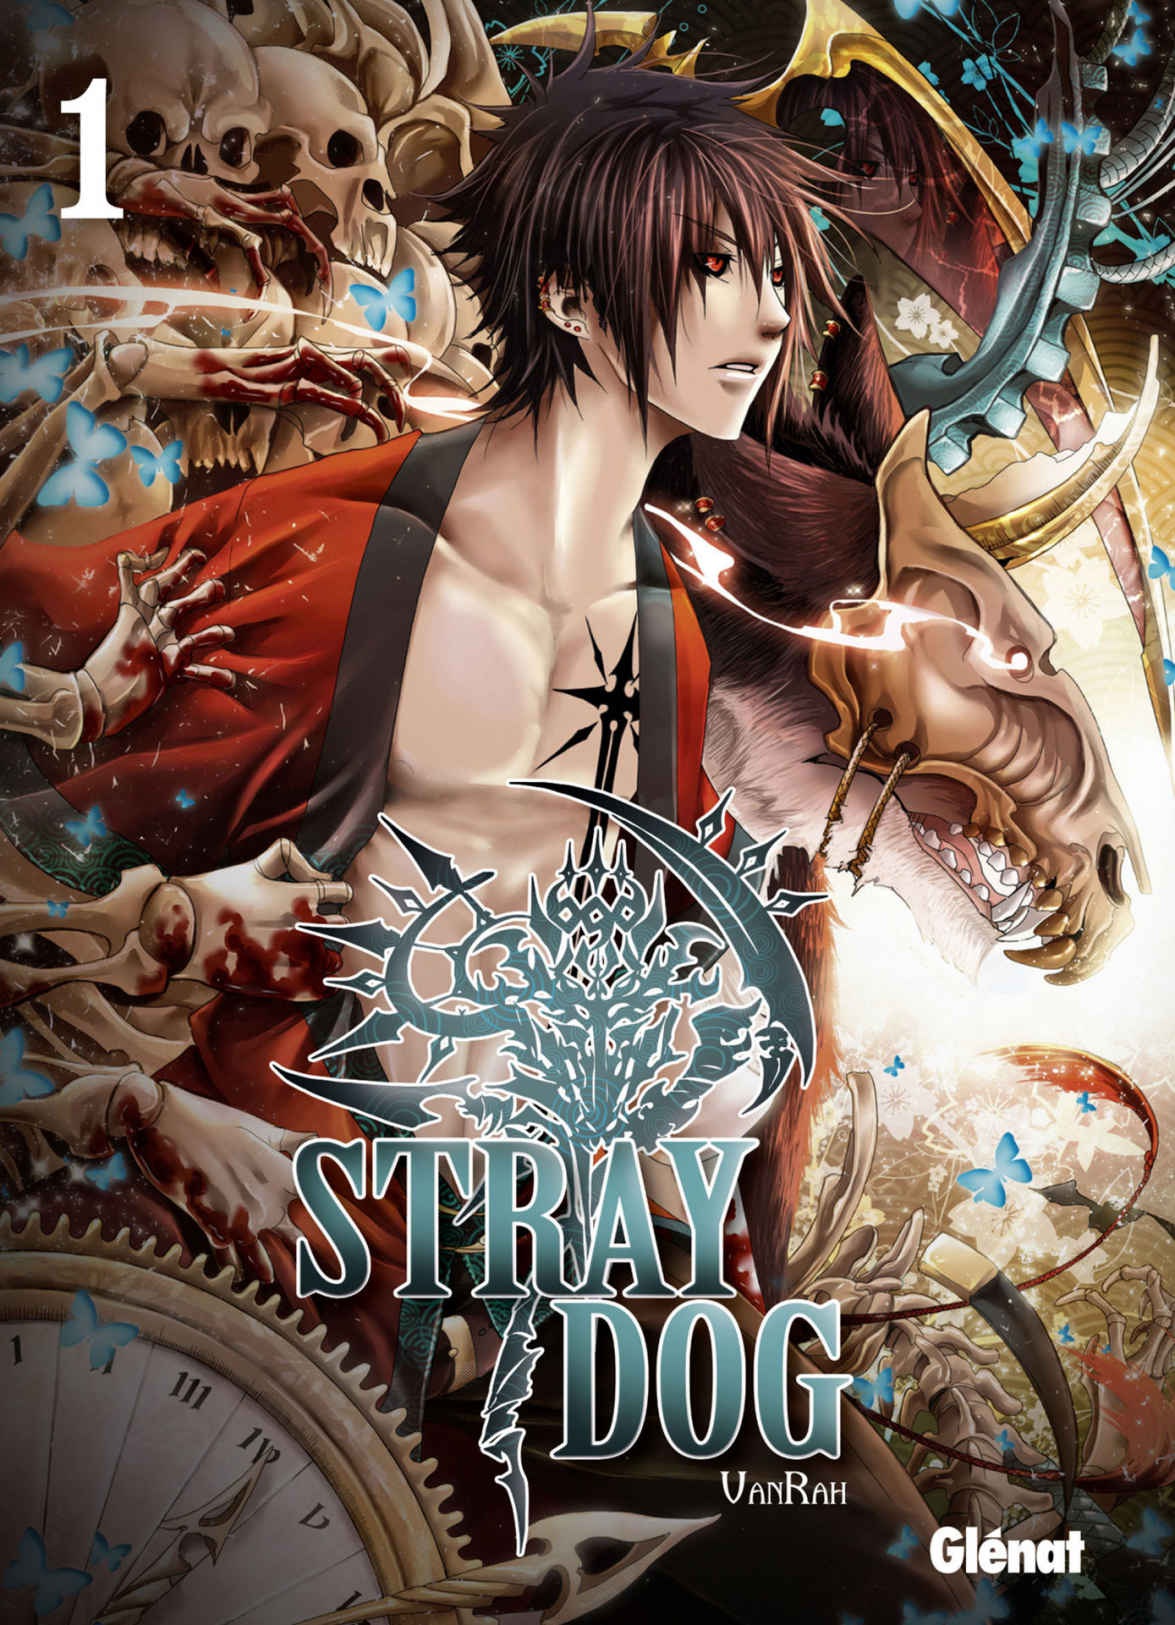 Stray Dog (VanRah) Vol. 1 Ch. 1 The Master Commands, the Dog Obeys